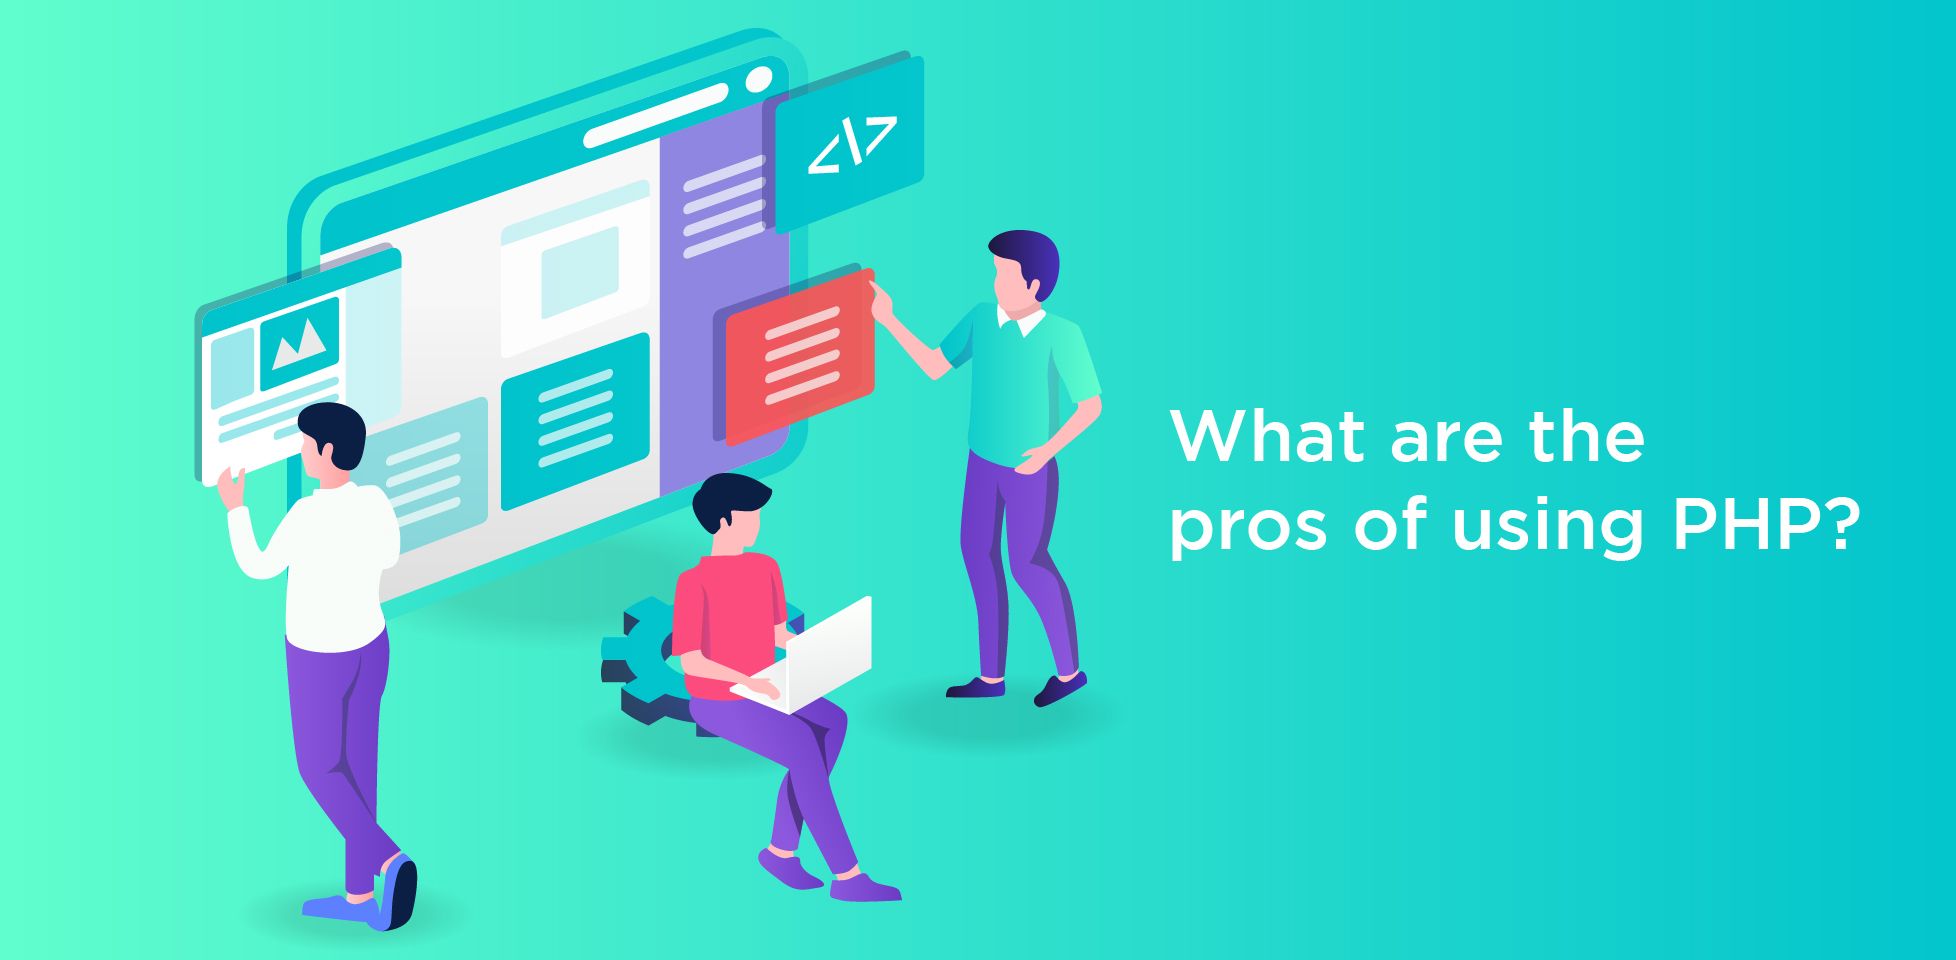 What are the pros of using PHP?